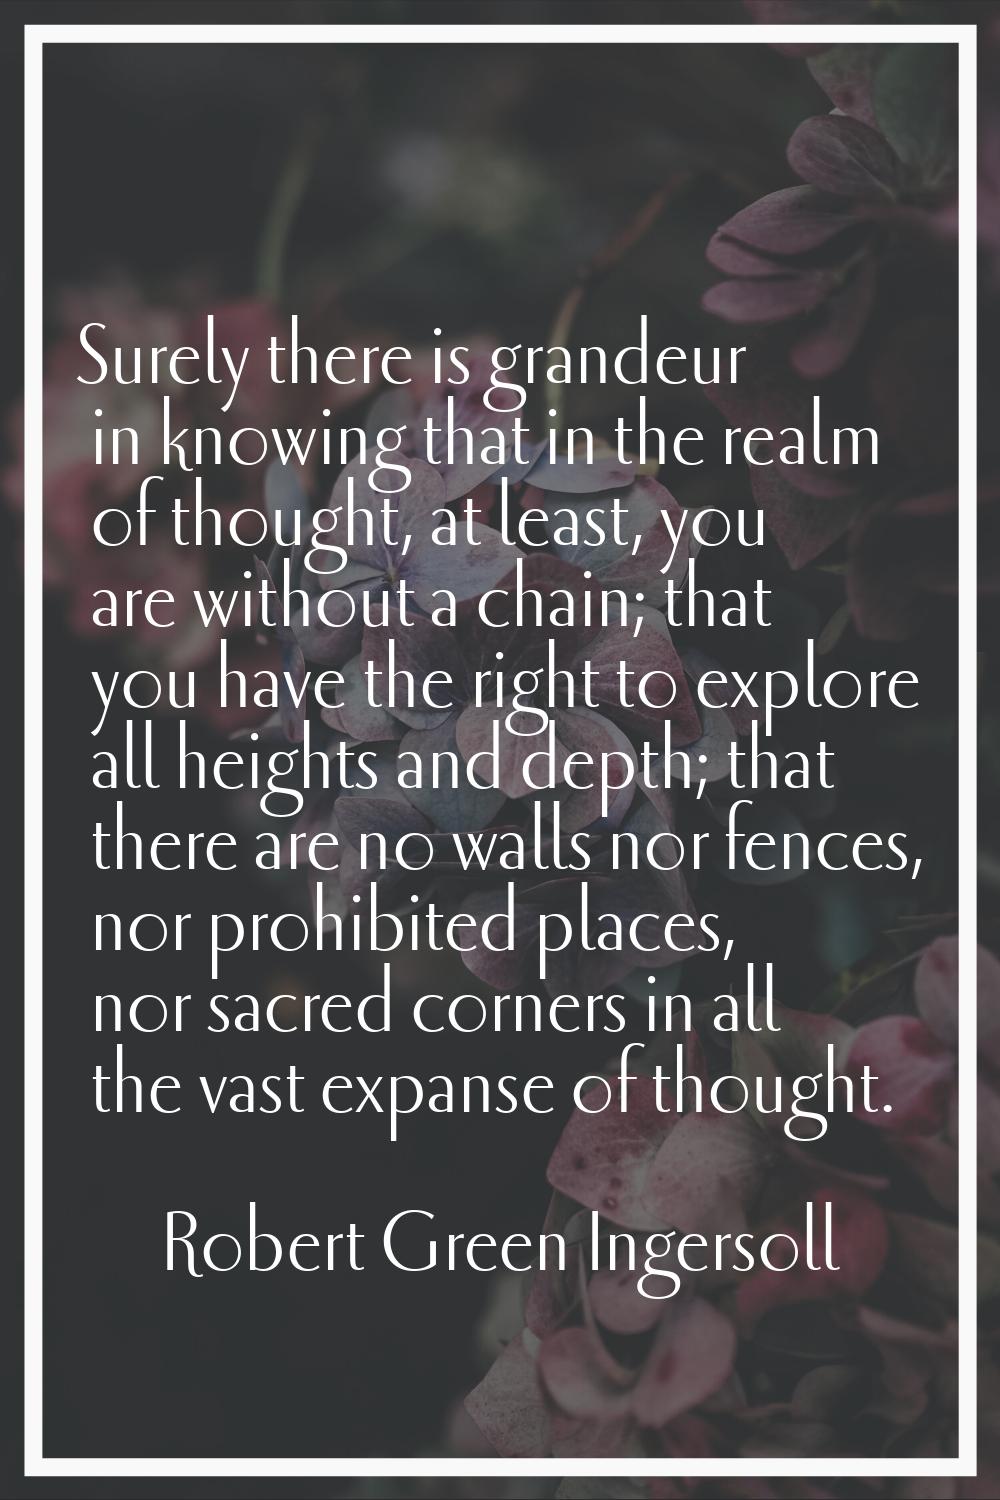 Surely there is grandeur in knowing that in the realm of thought, at least, you are without a chain